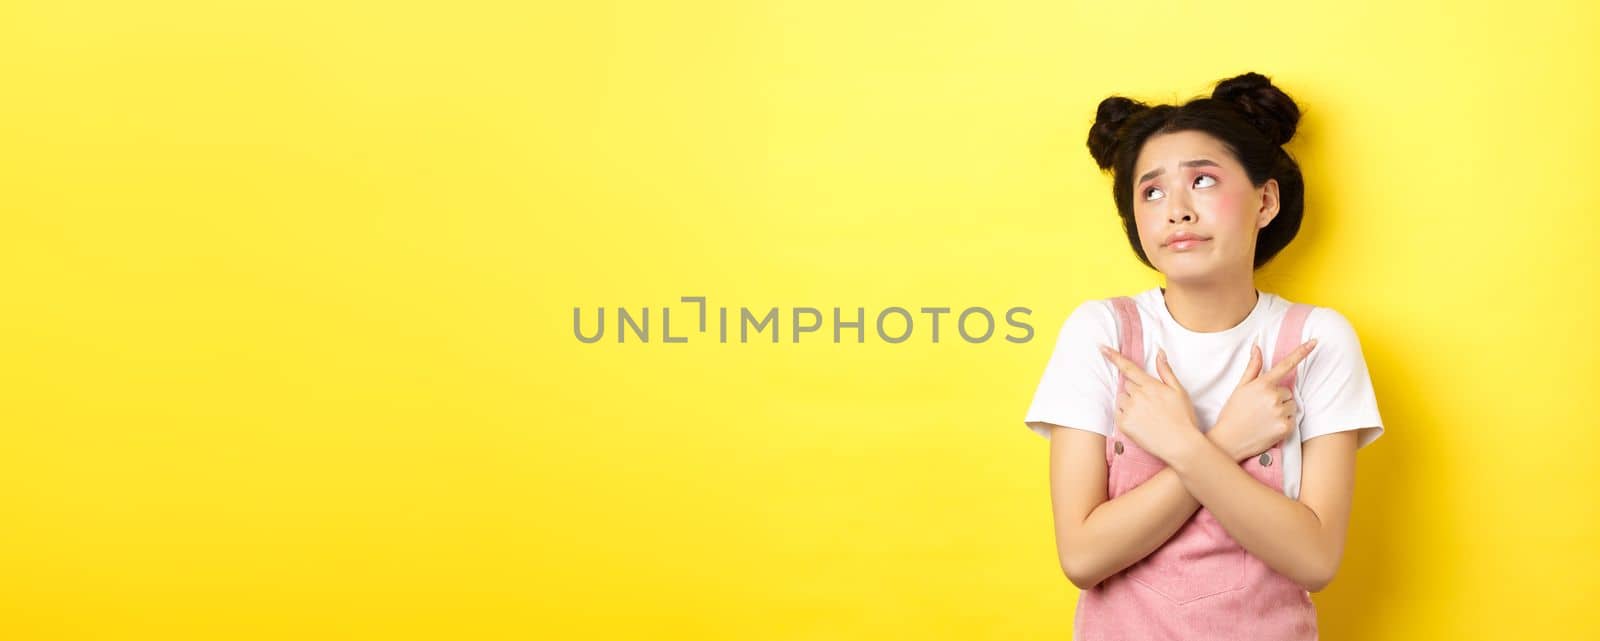 Indecisive asian teen girl troubled to make choice, pointing sideways and looking at logo confused, standing on yellow background.